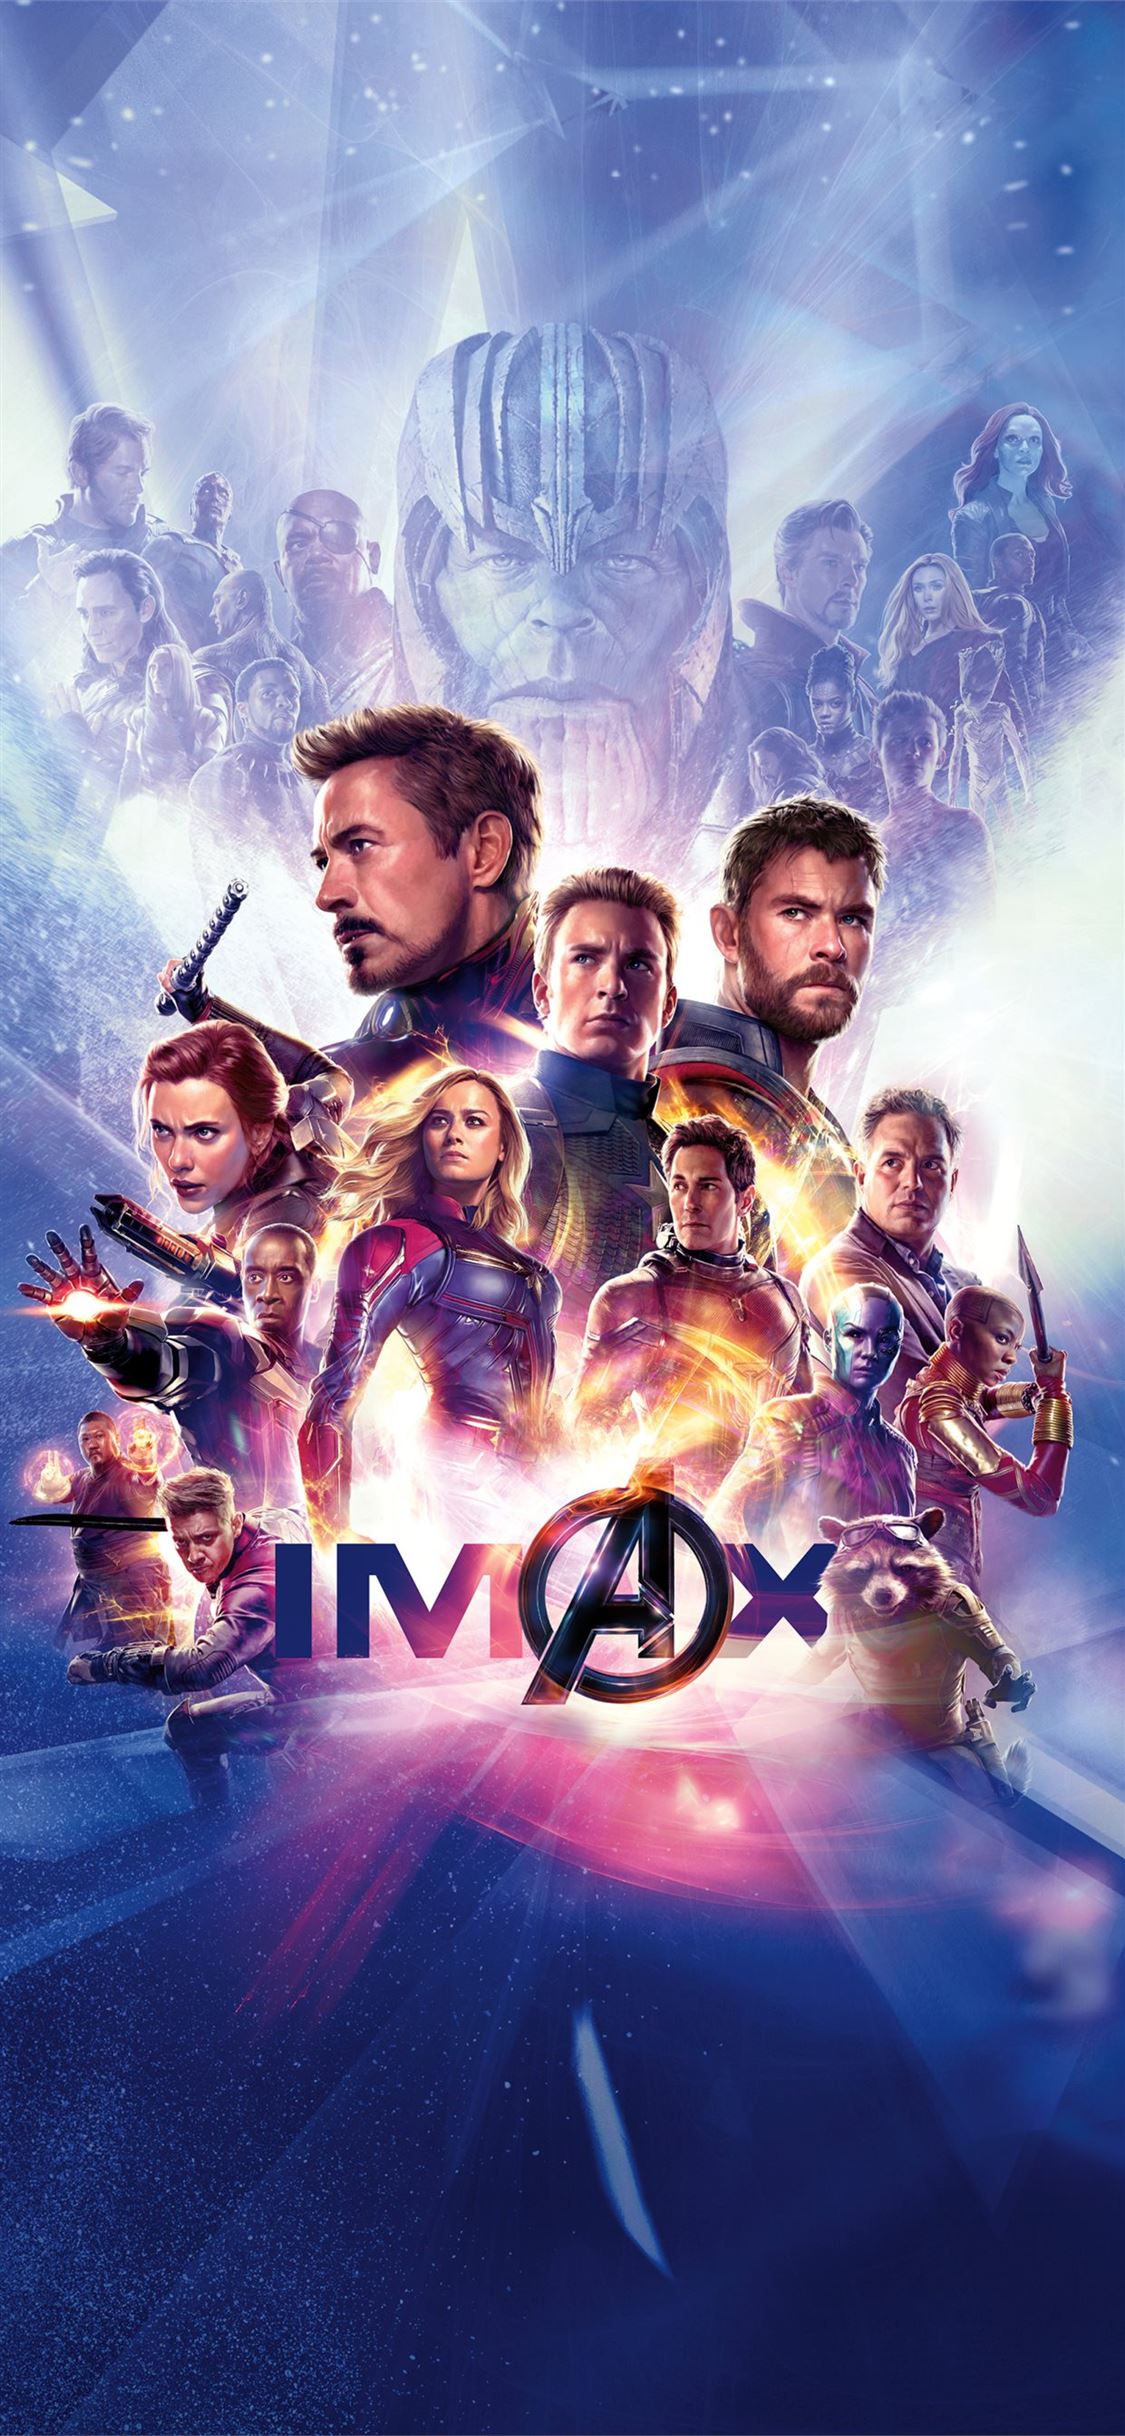 Avengers End Game 12k Iphone X Wallpapers Free Download